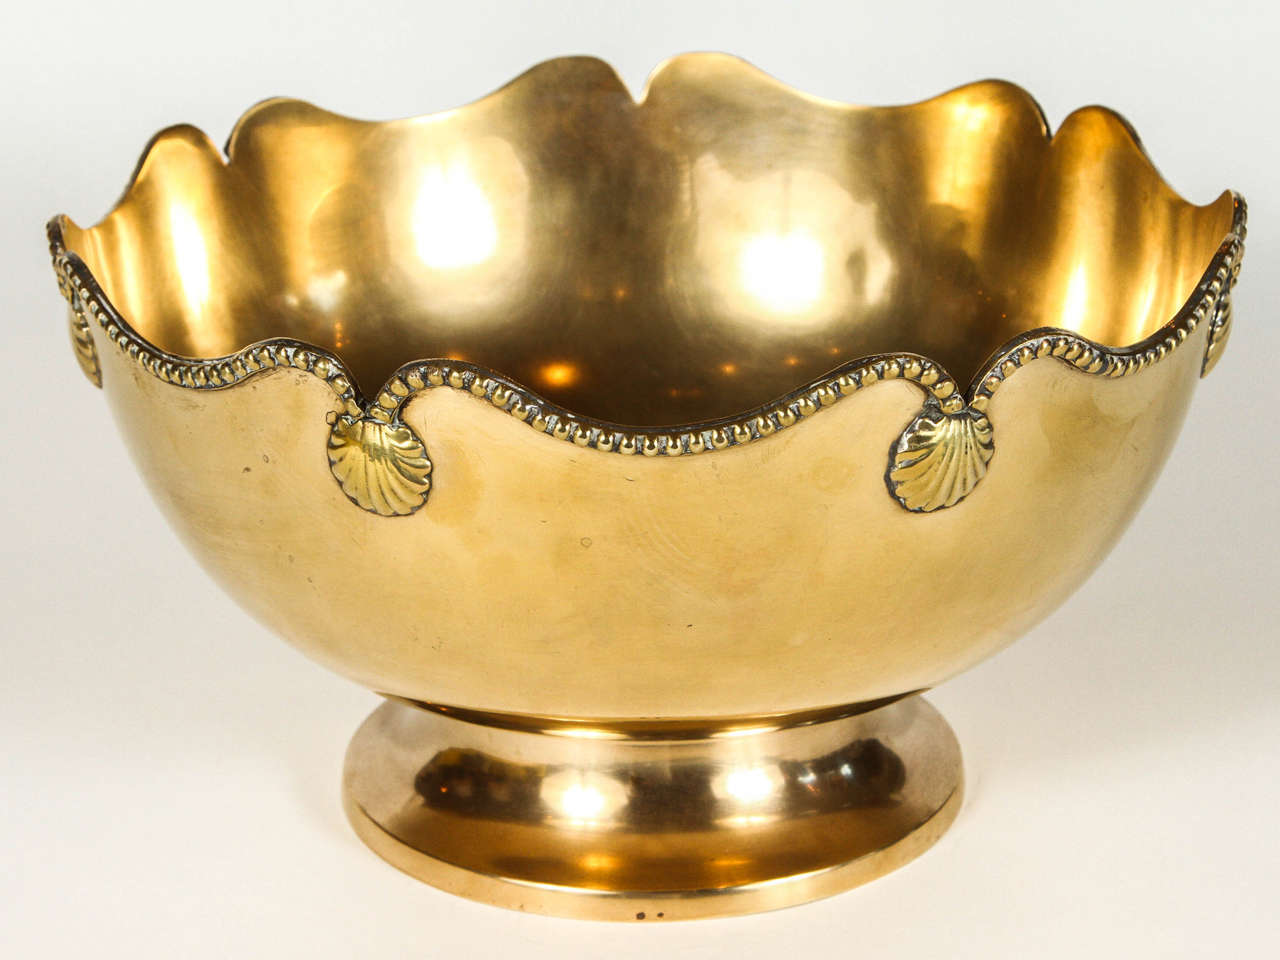 Vintage brass centerpiece bowl with beaded lip and clam shell decoration.